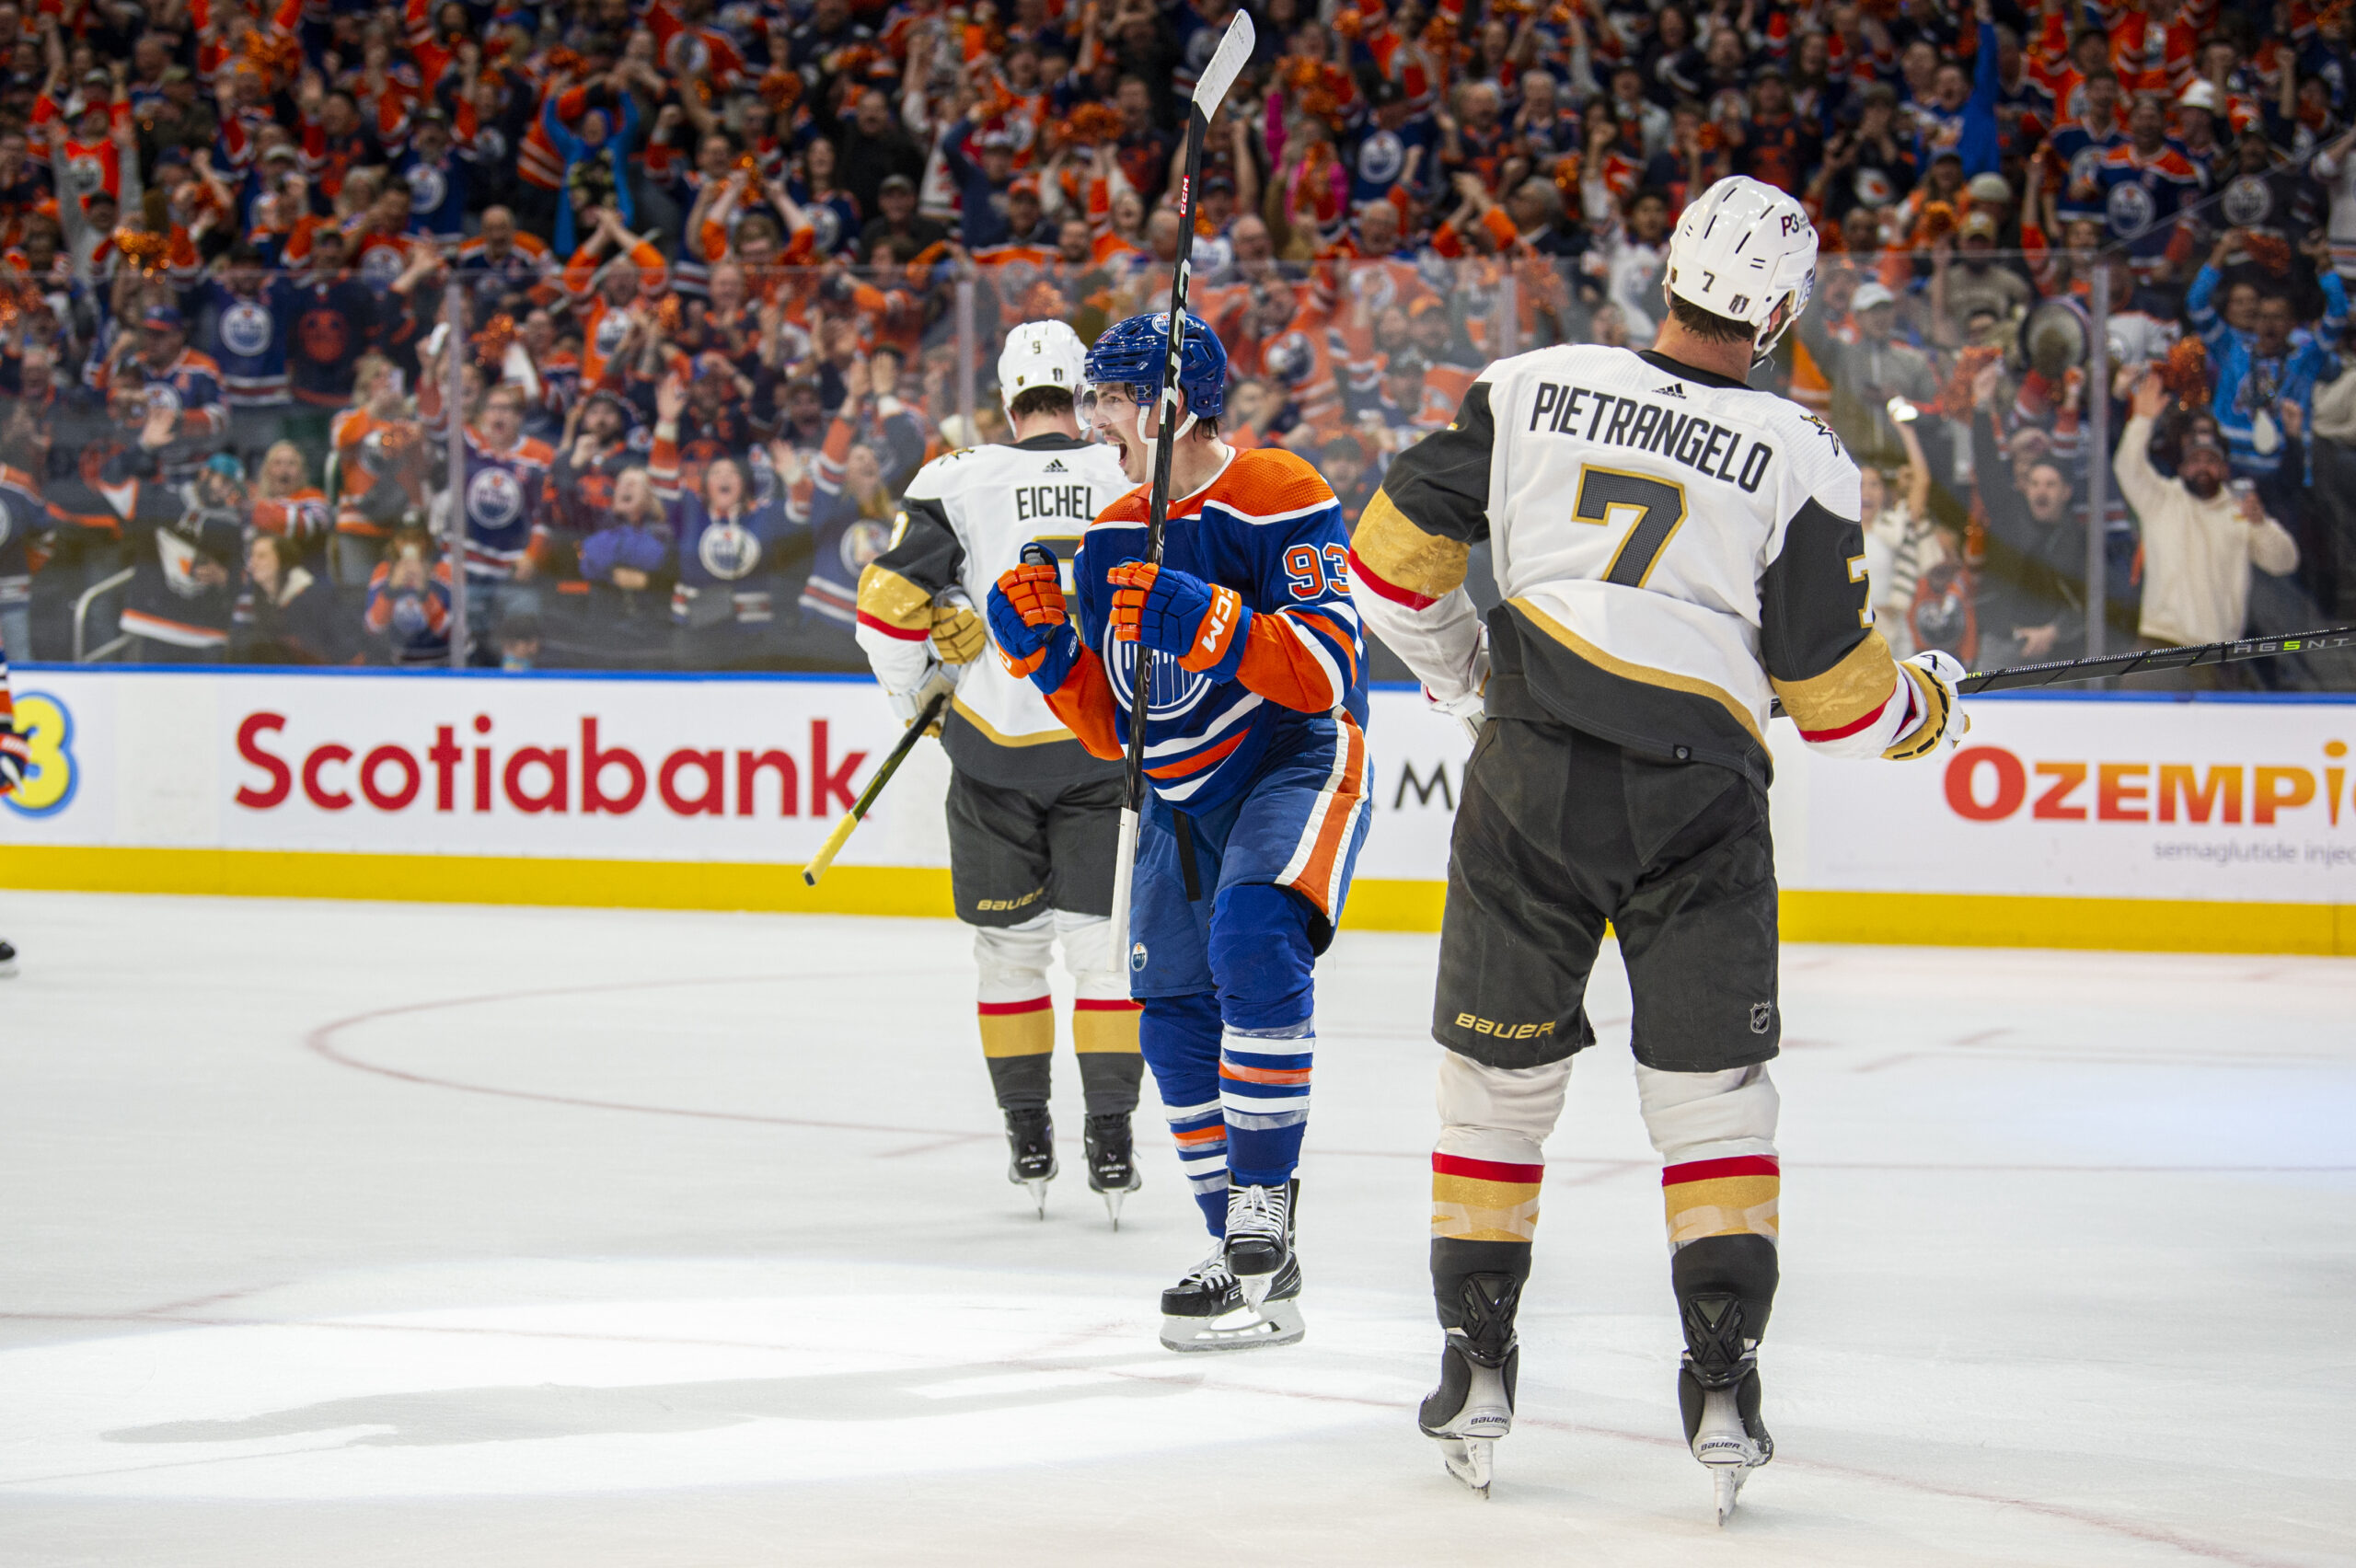 Oilers vs. Knights: Nurse suspended for starting fight